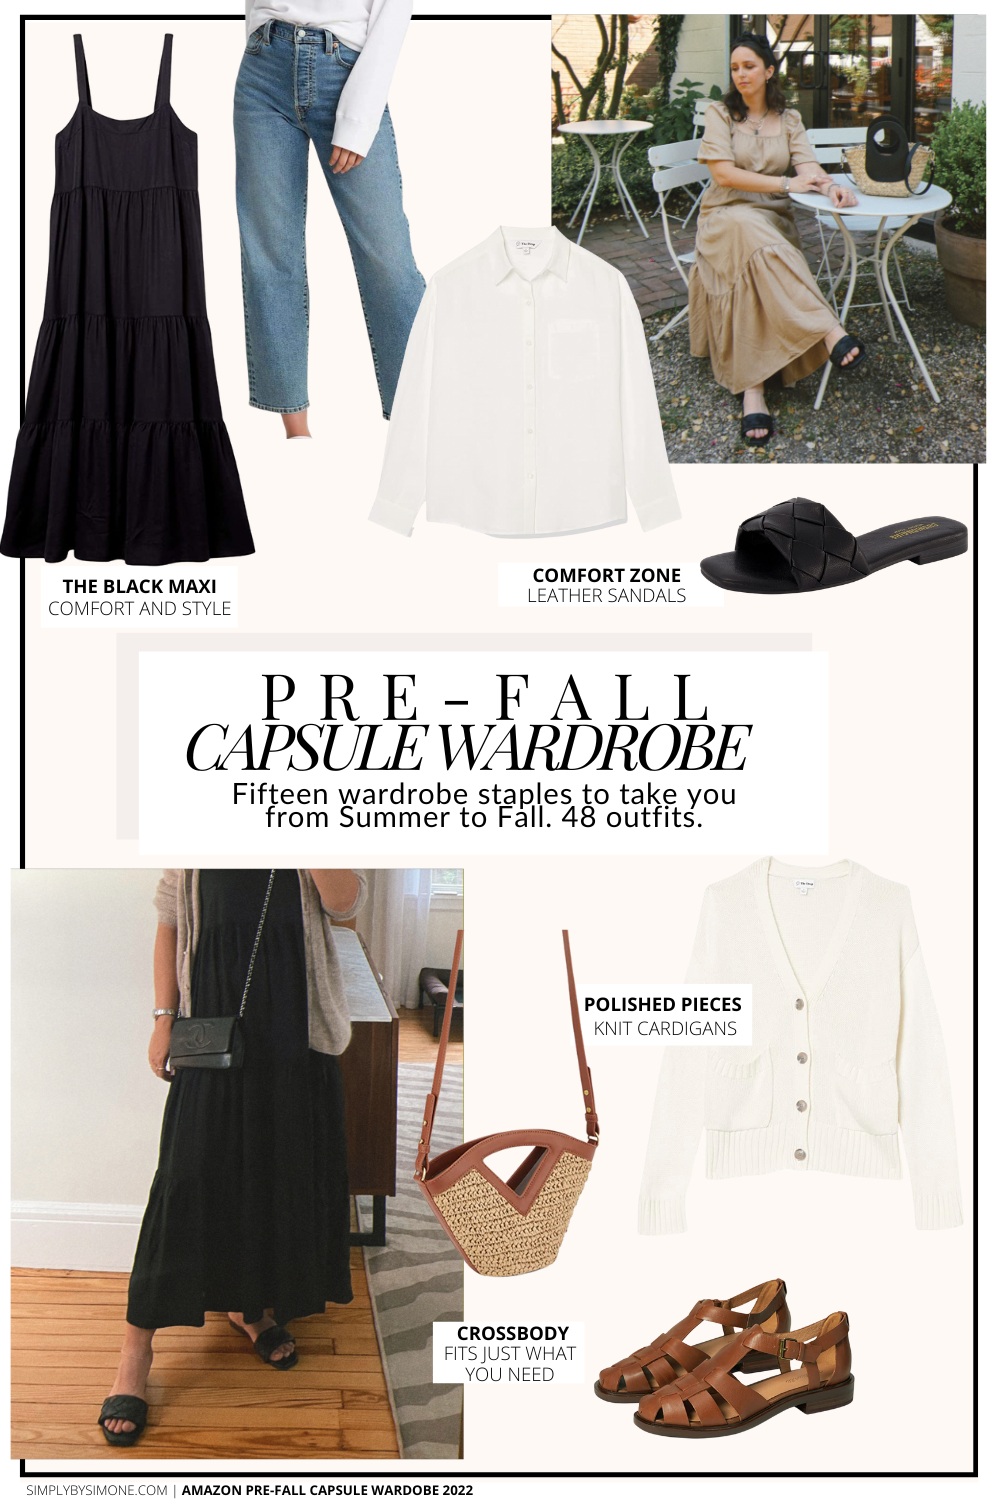 Amazon Pre-Fall Capsule Wardrobe – 15 Pieces, 48 Outfits